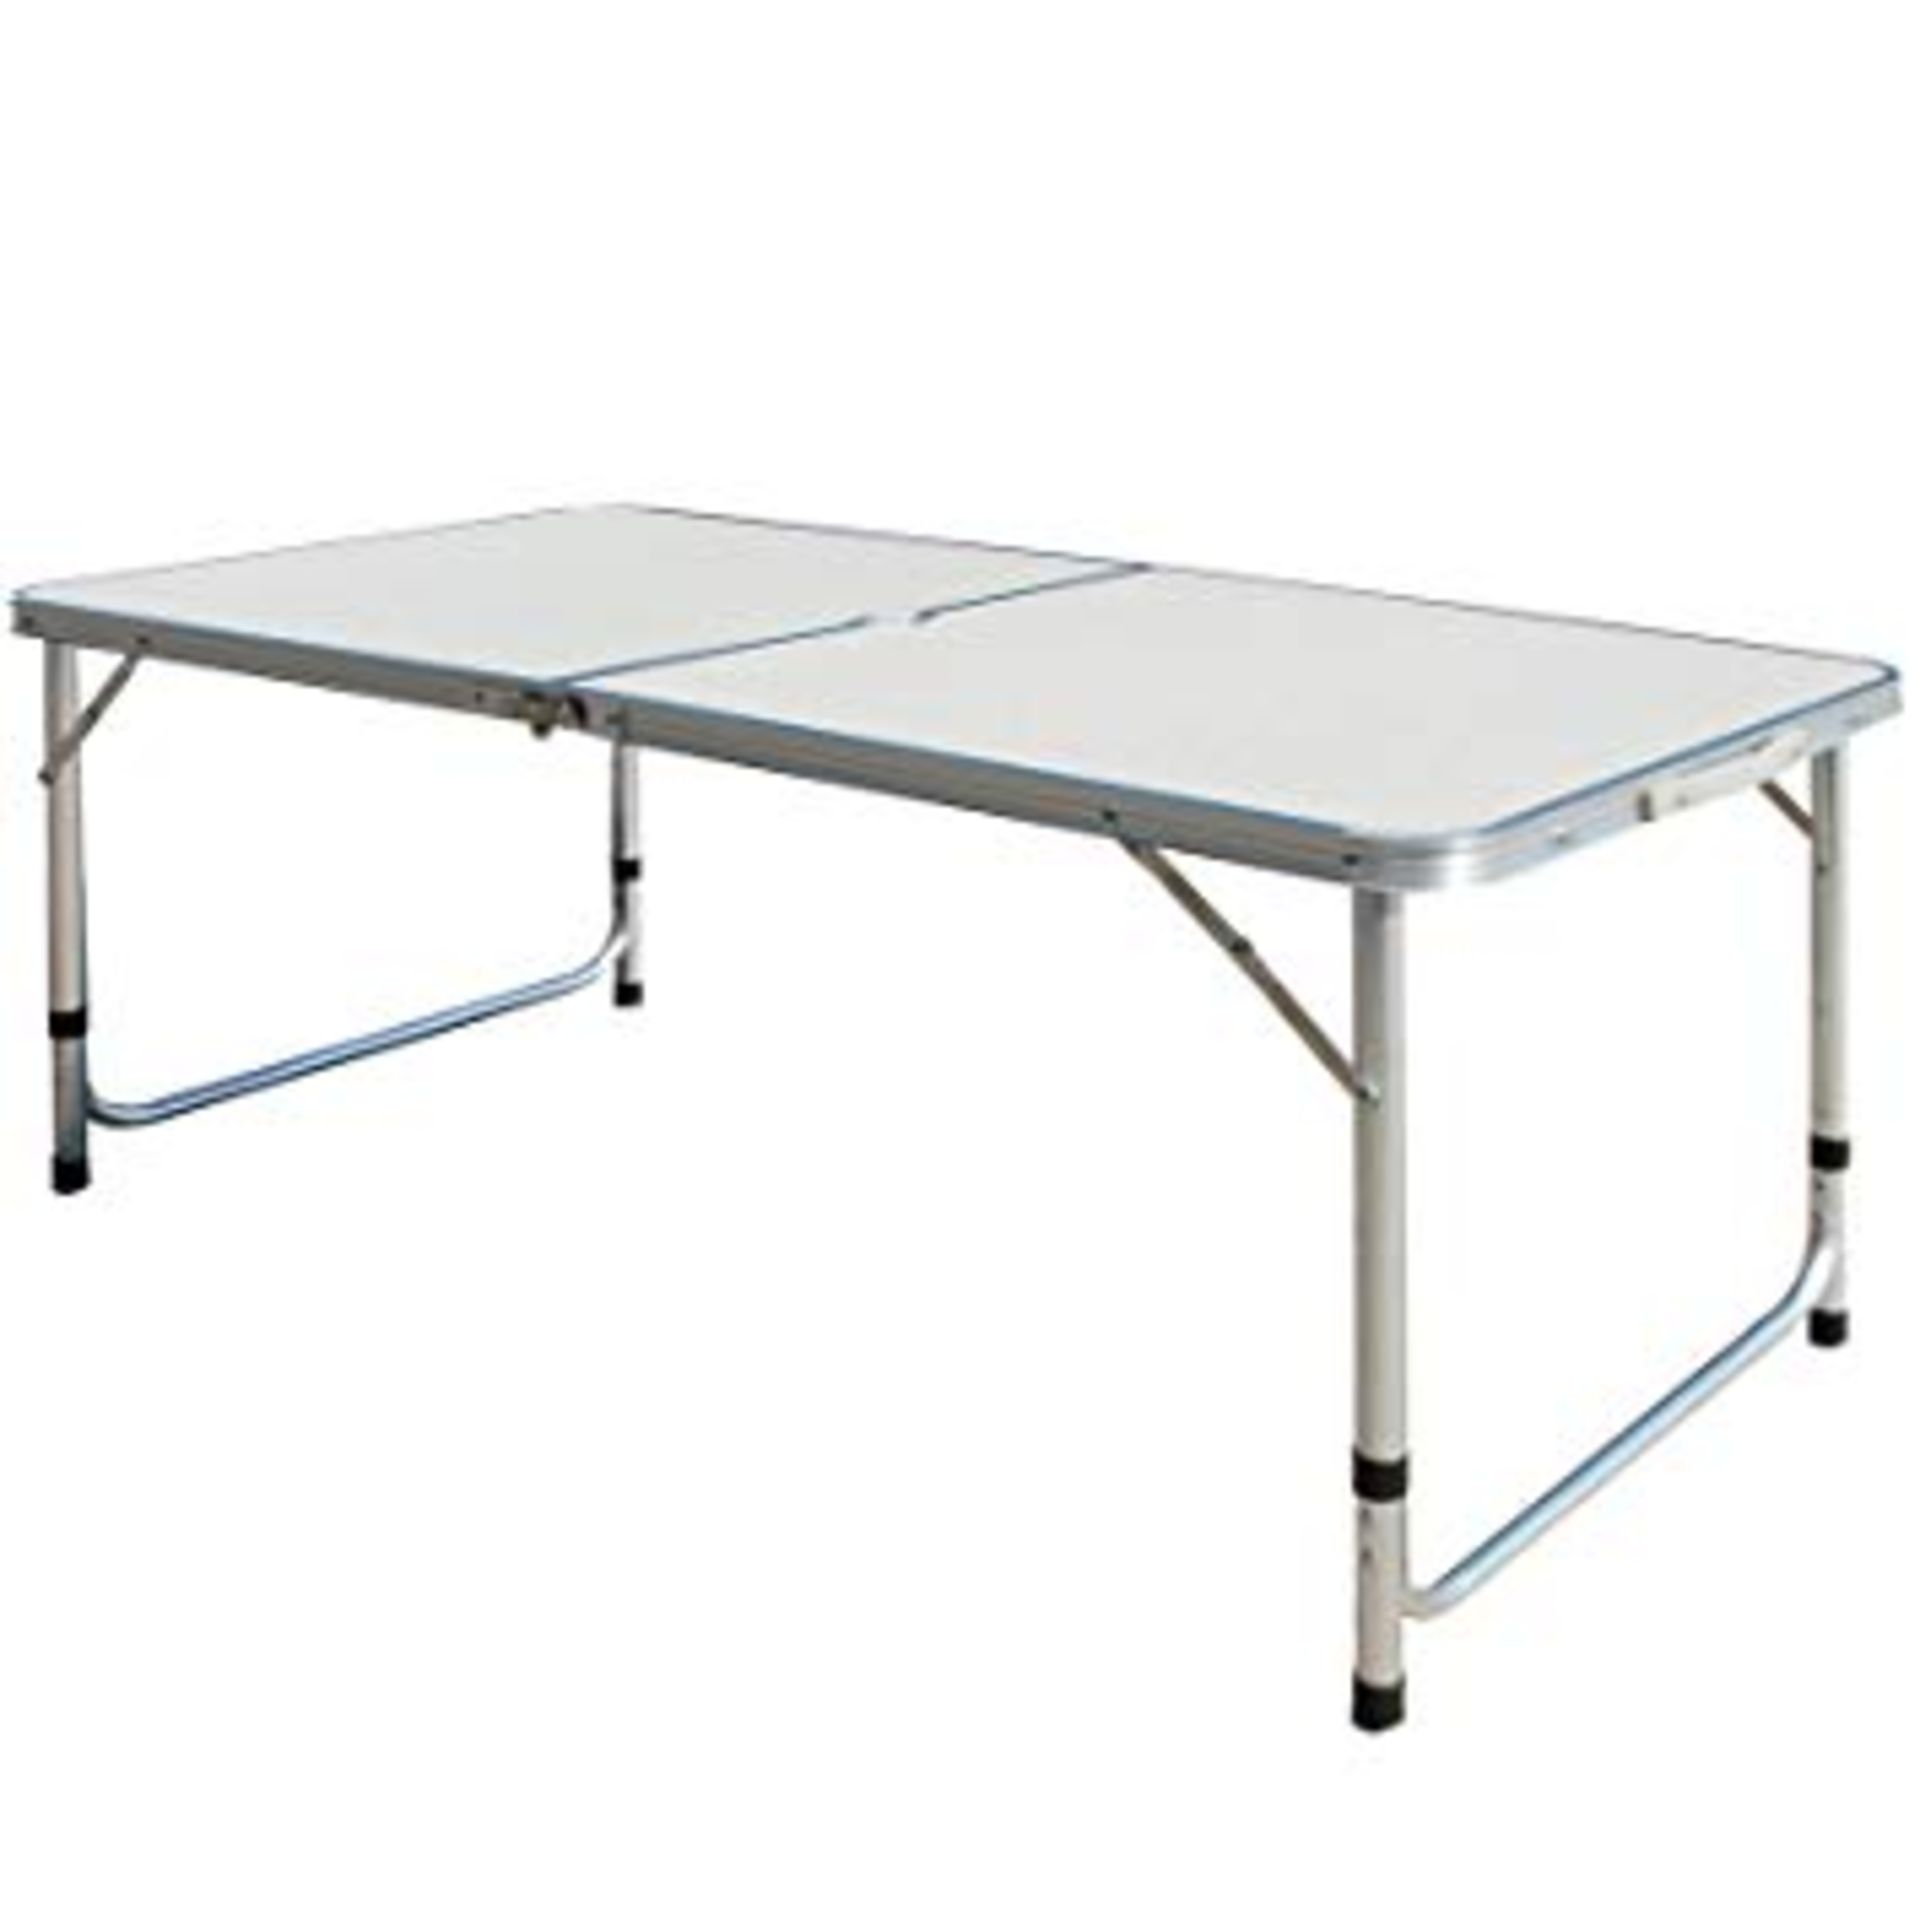 + VAT Brand New 4ft Folding Camping Or Garden/Utility Table - Image 2 of 2